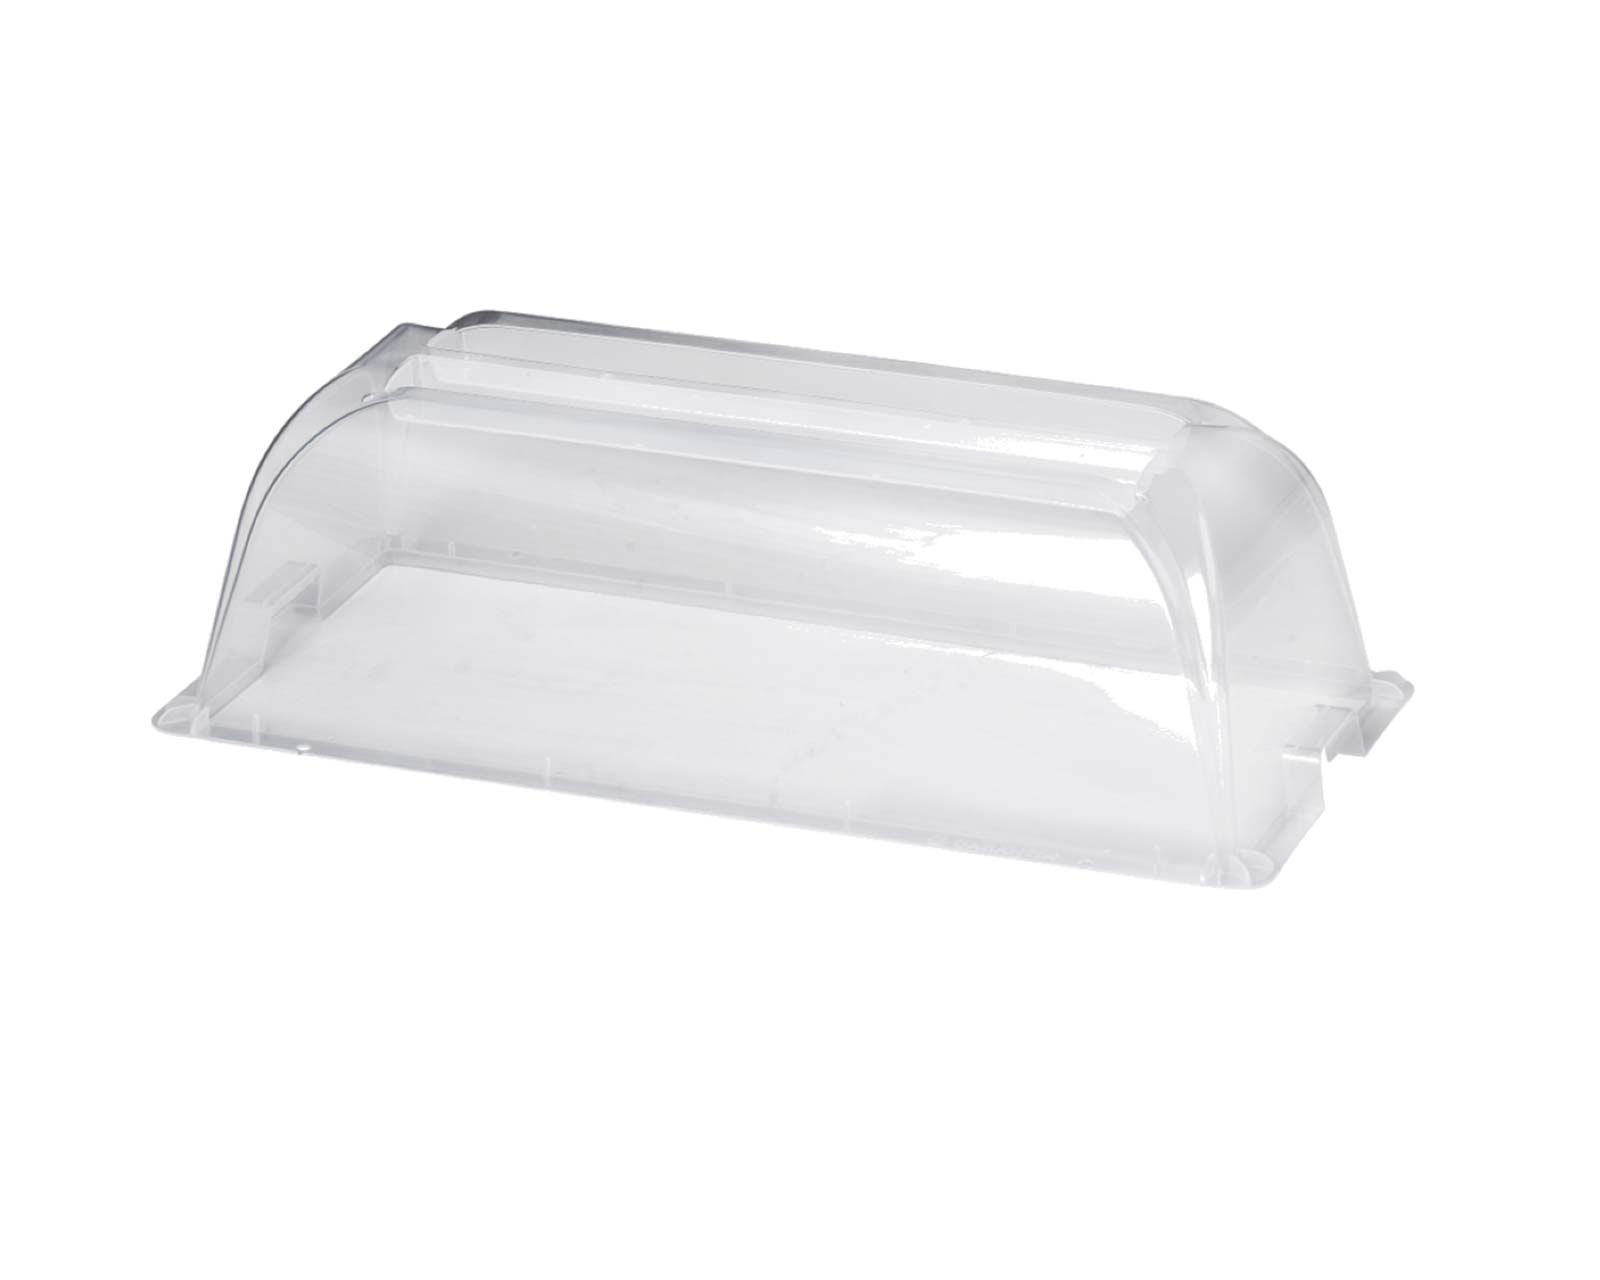 Clear plastic cover designed to fit the Urban Raised Planter